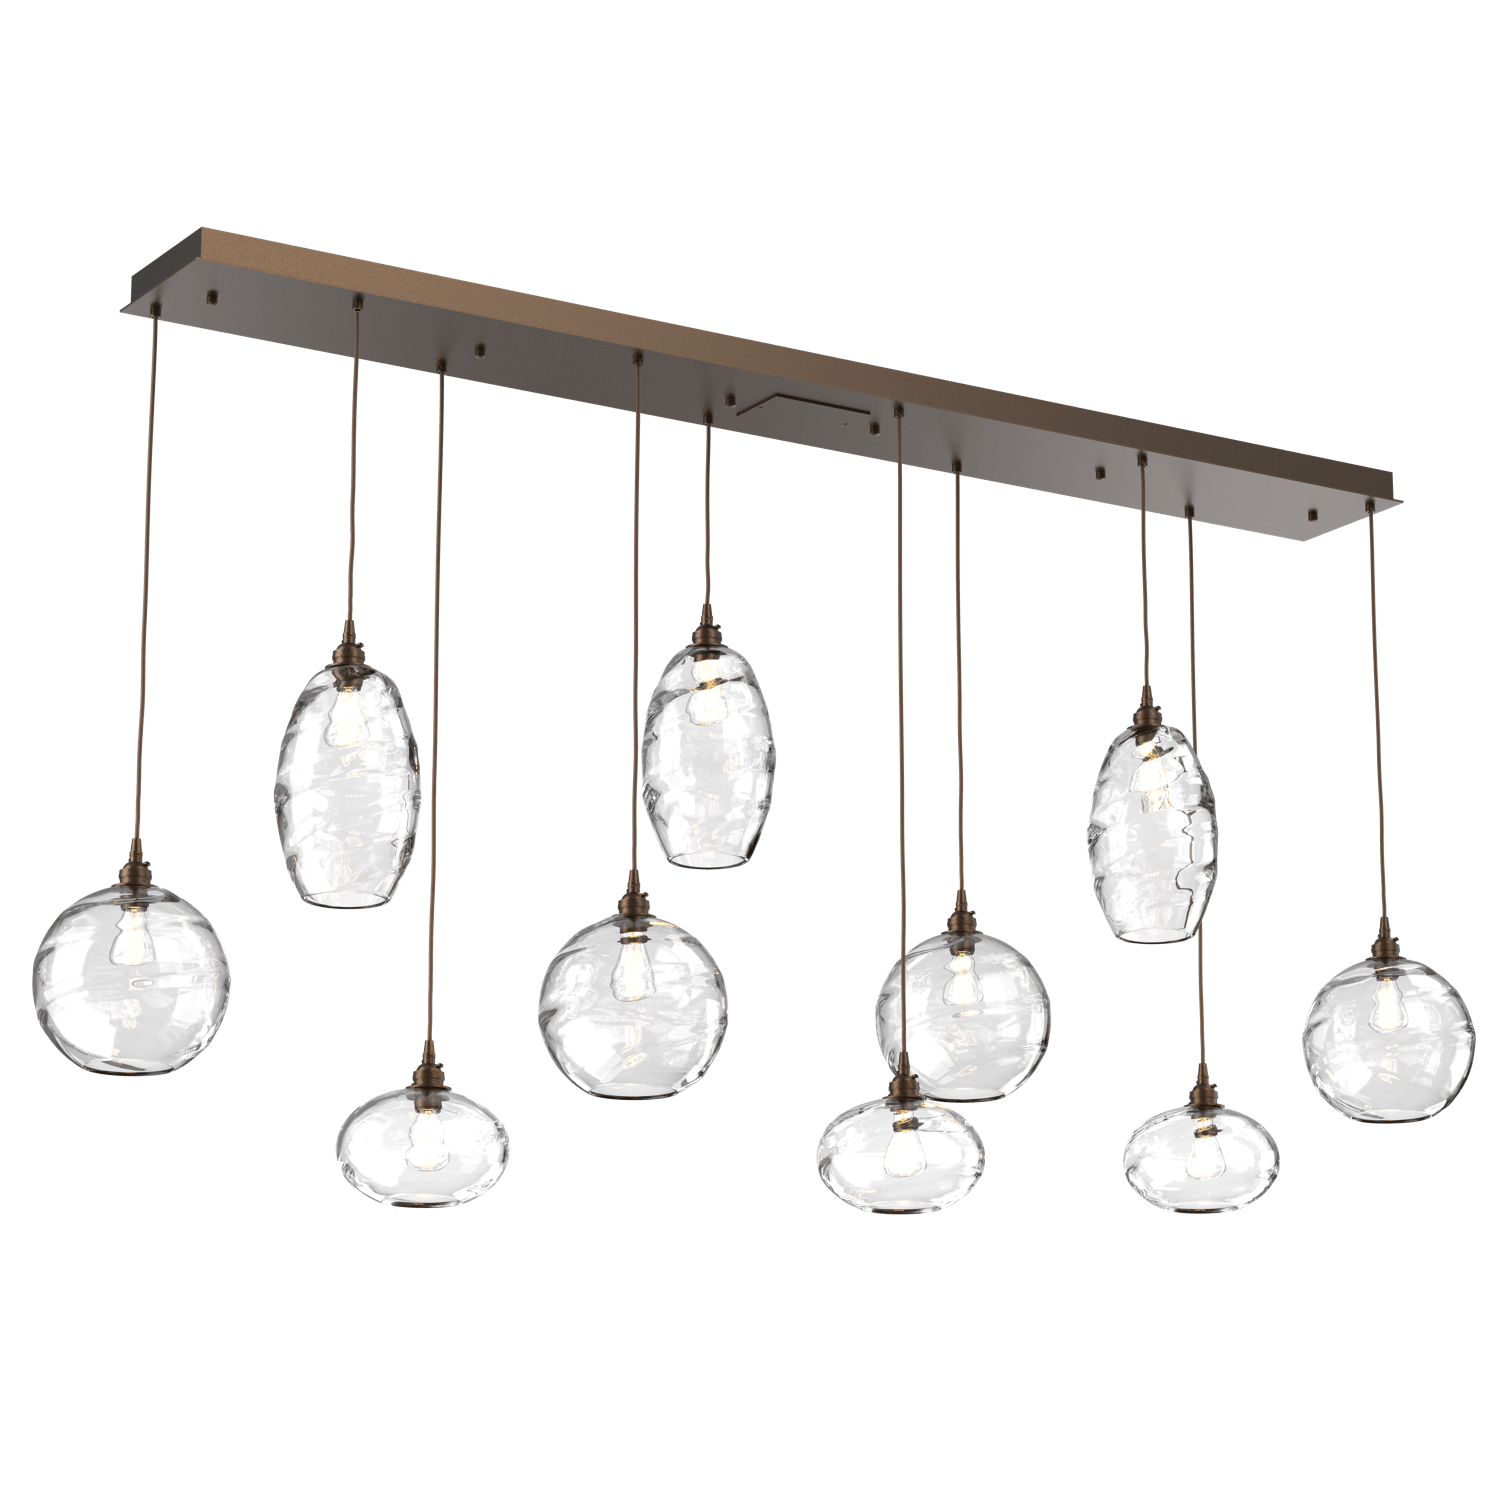 PLB0048-10-FB-OC-Hammerton-Studio-Optic-Blown-Glass-Misto-10-light-linear-pendant-chandelier-with-flat-bronze-finish-and-optic-clear-blown-glass-shades-and-incandescent-lamping